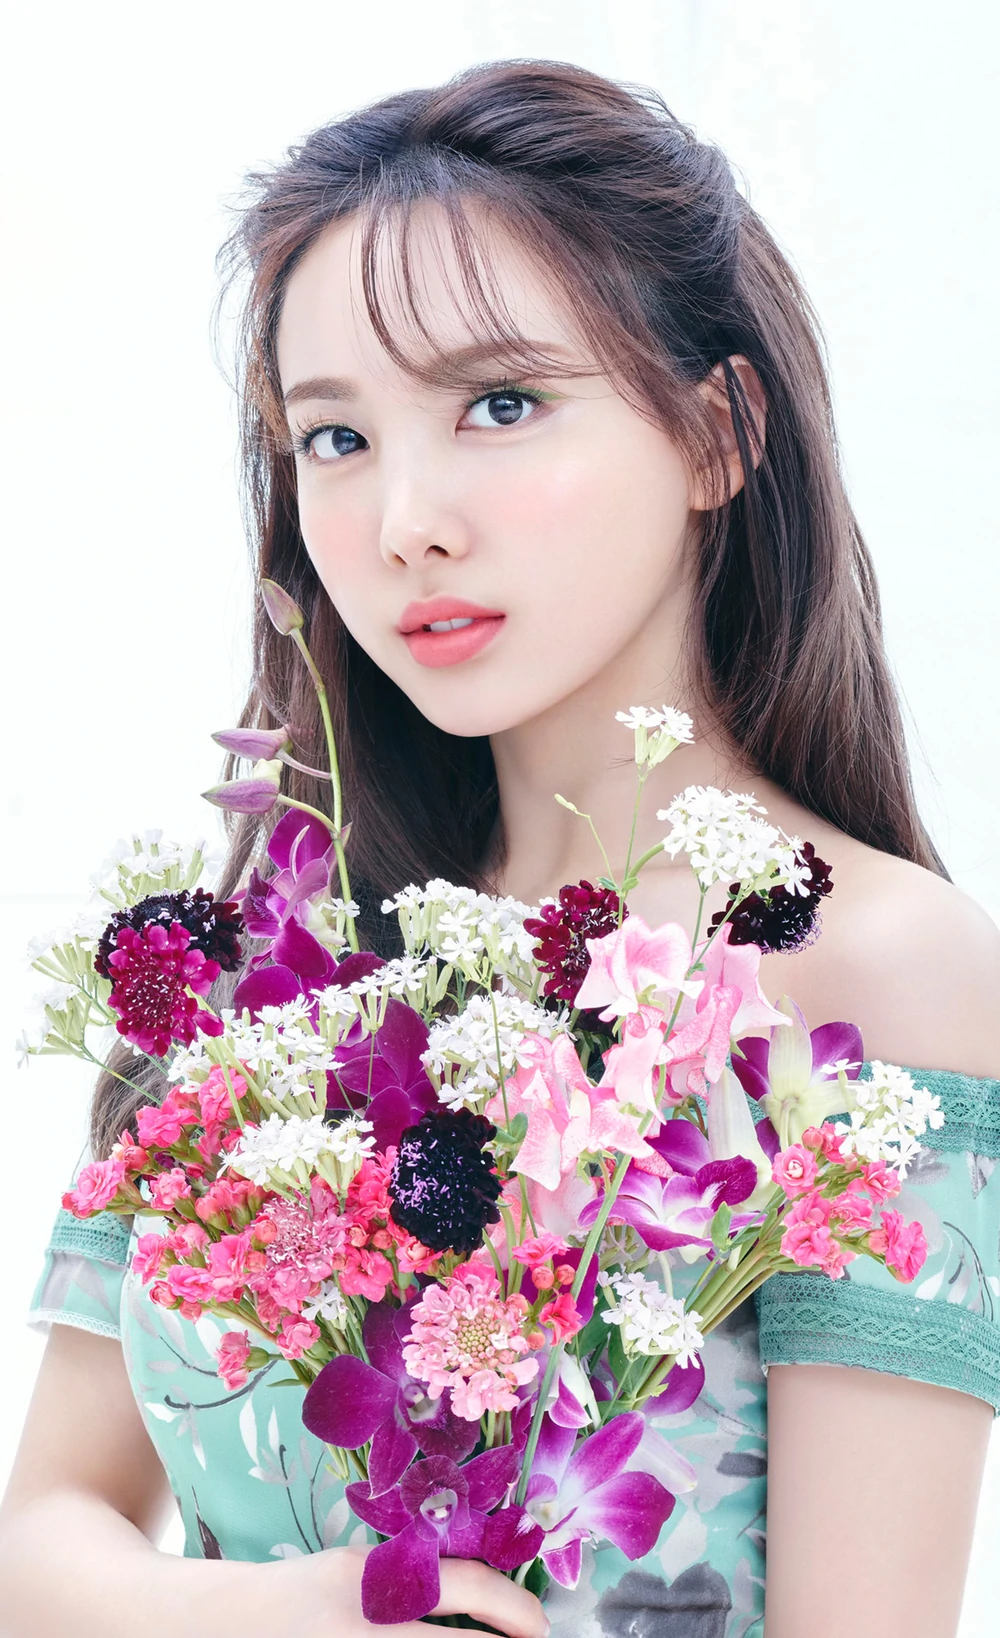 Twice #Twice3 Nayeon Concept Teaser Picture Image Photo Kpop K-Concept 2